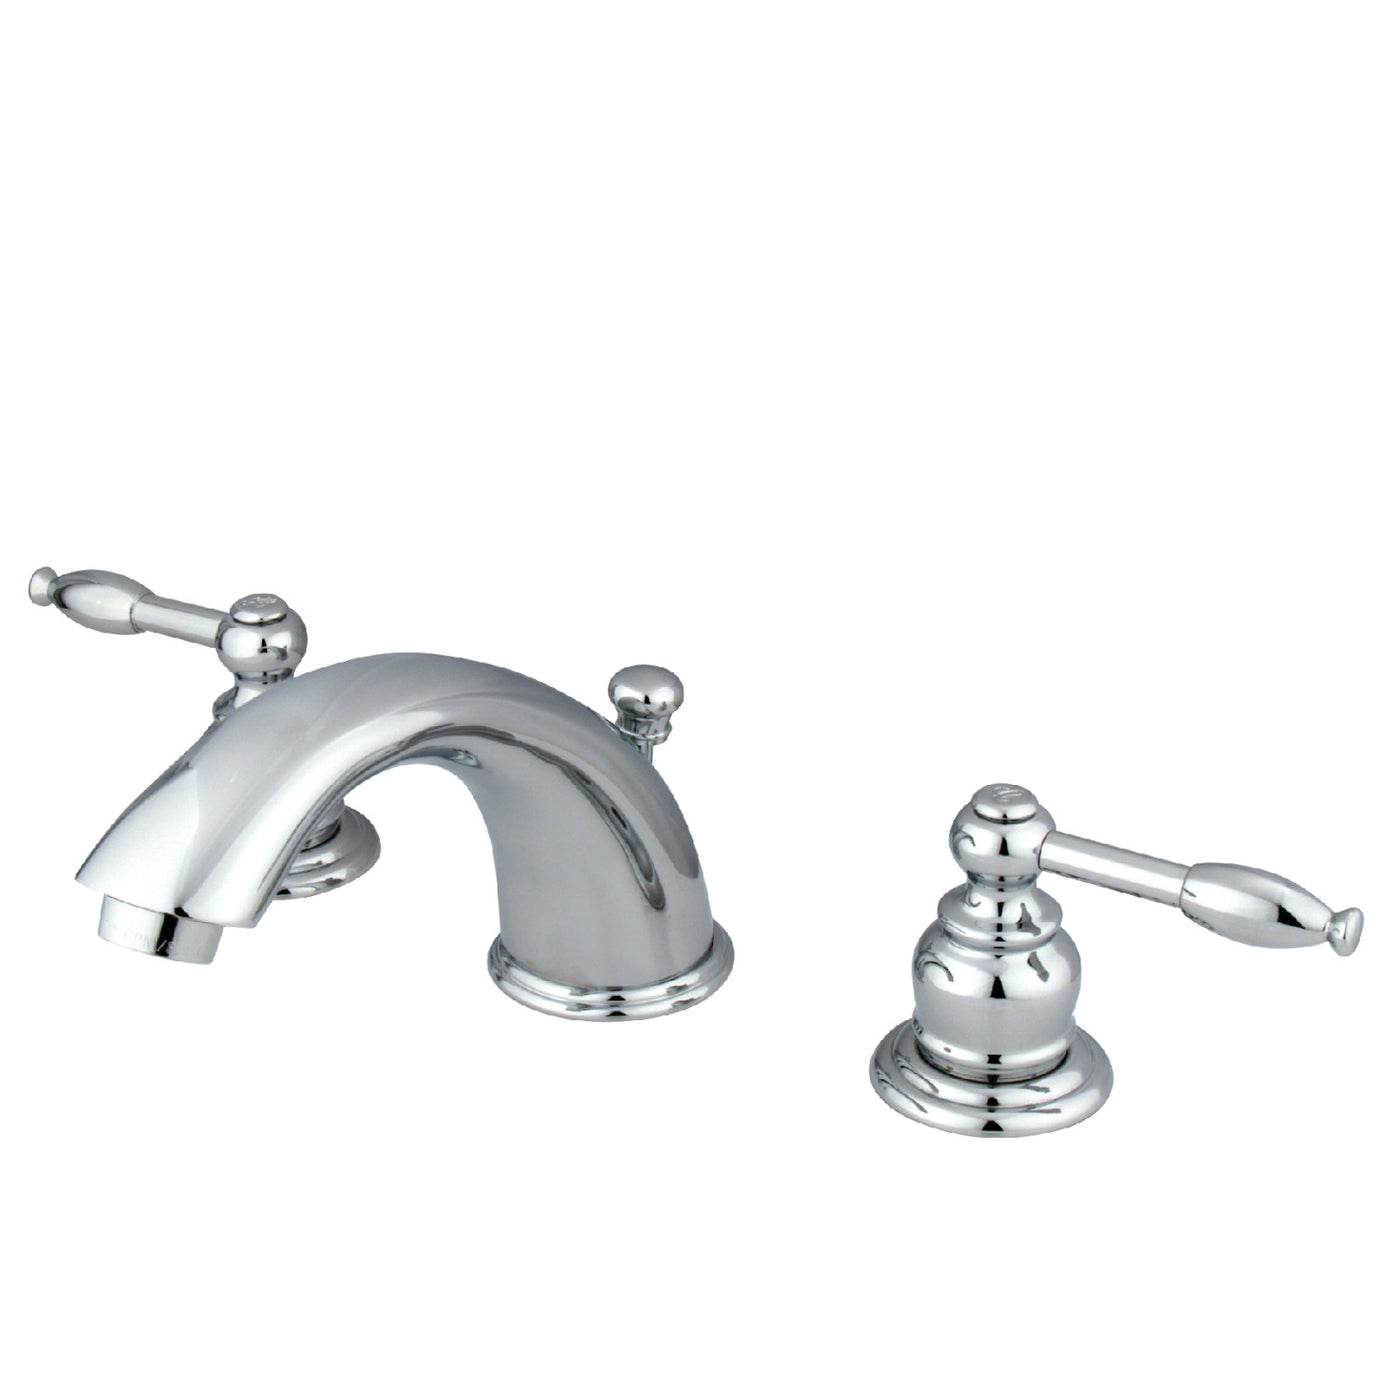 Elements of Design EB961KL Widespread Bathroom Faucet with Retail Pop-Up, Polished Chrome